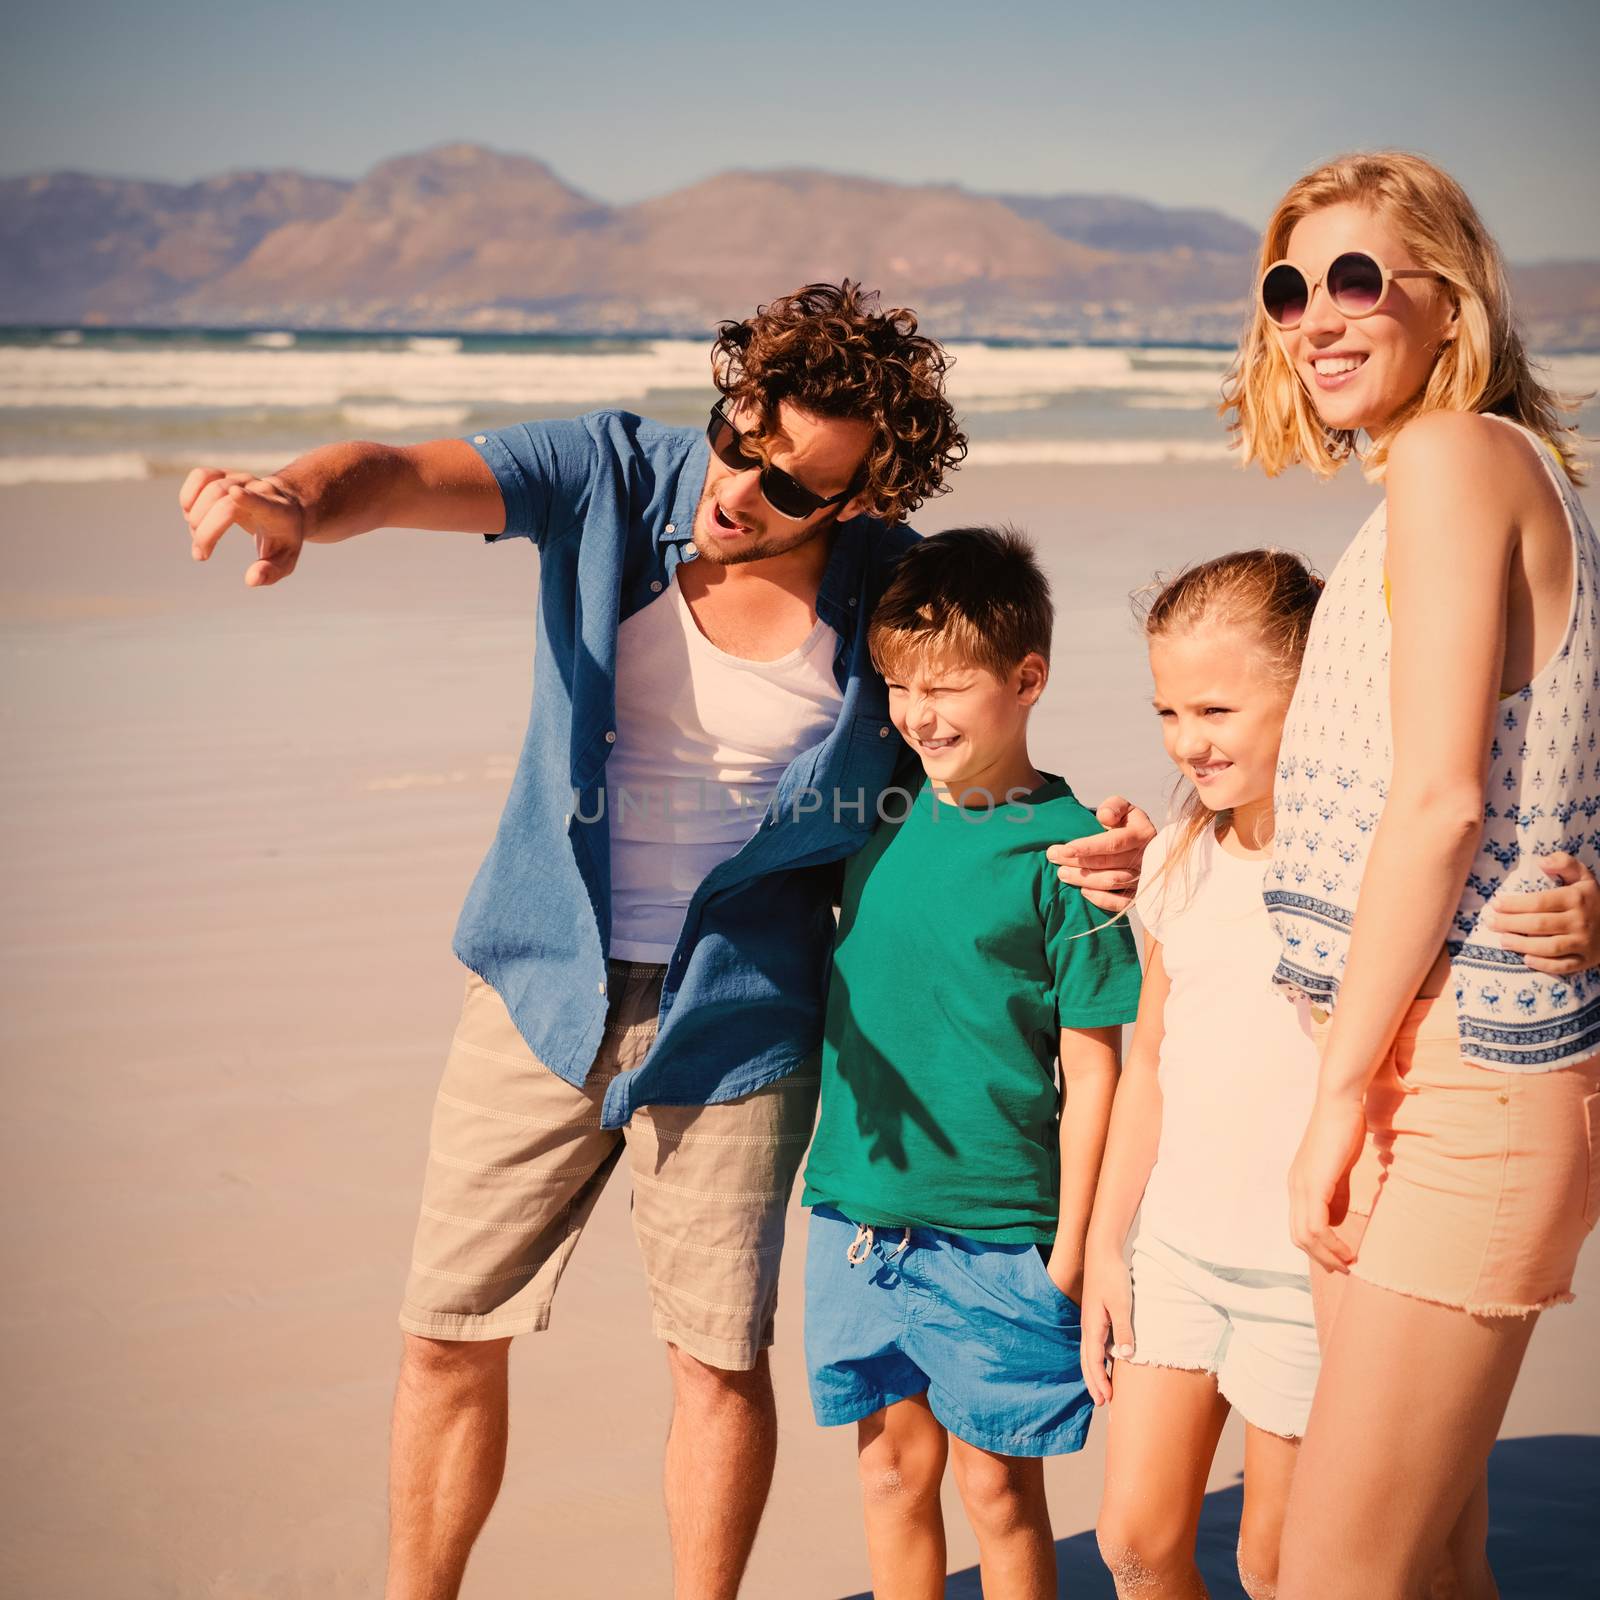 Man pointing away with family standing at beach during sunny day